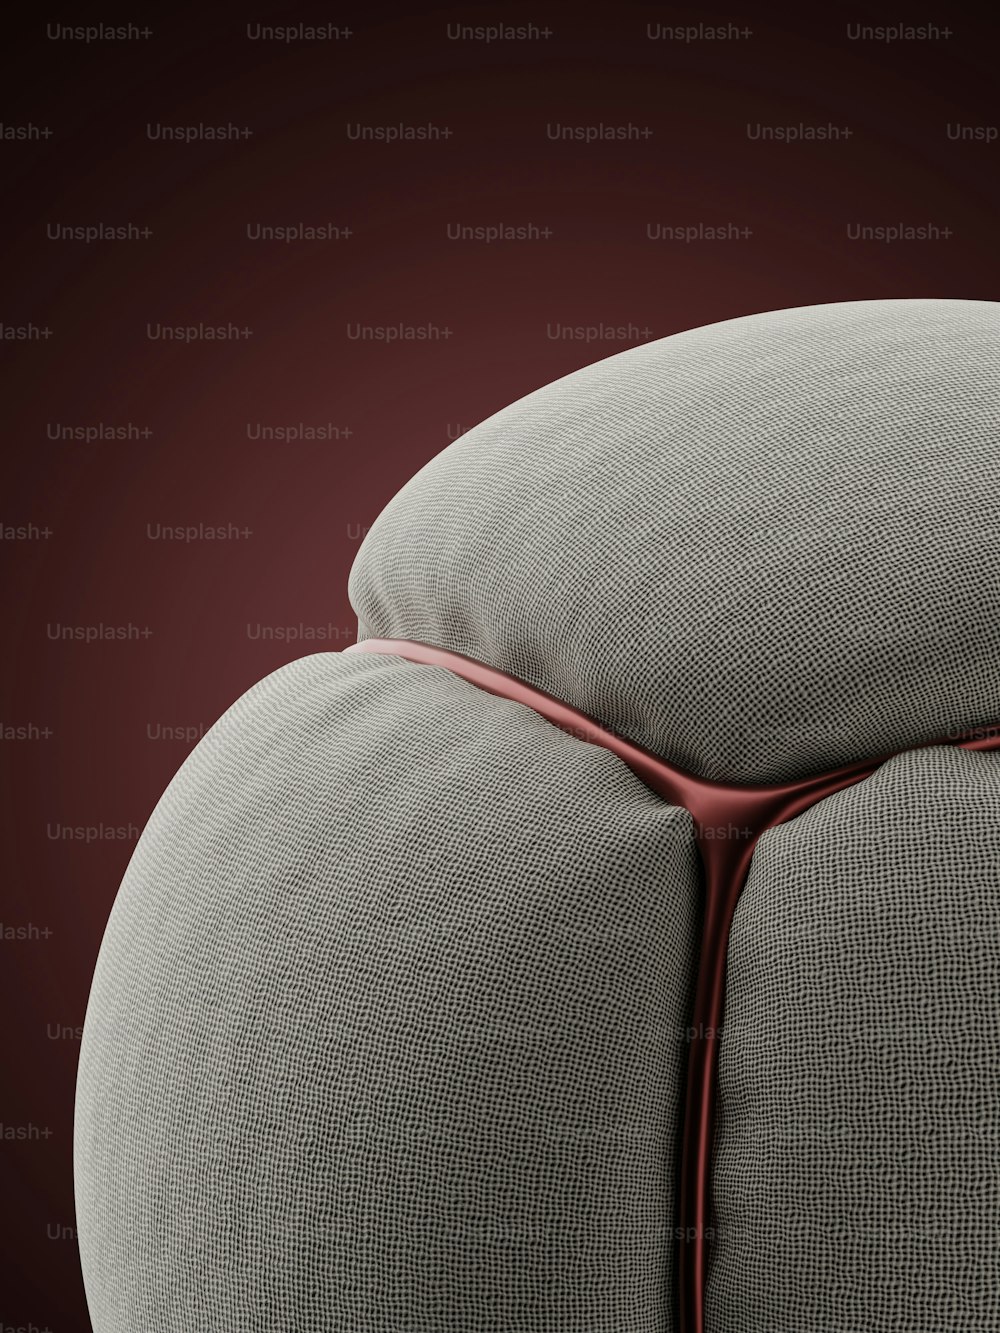 a close up of a cushion on a chair